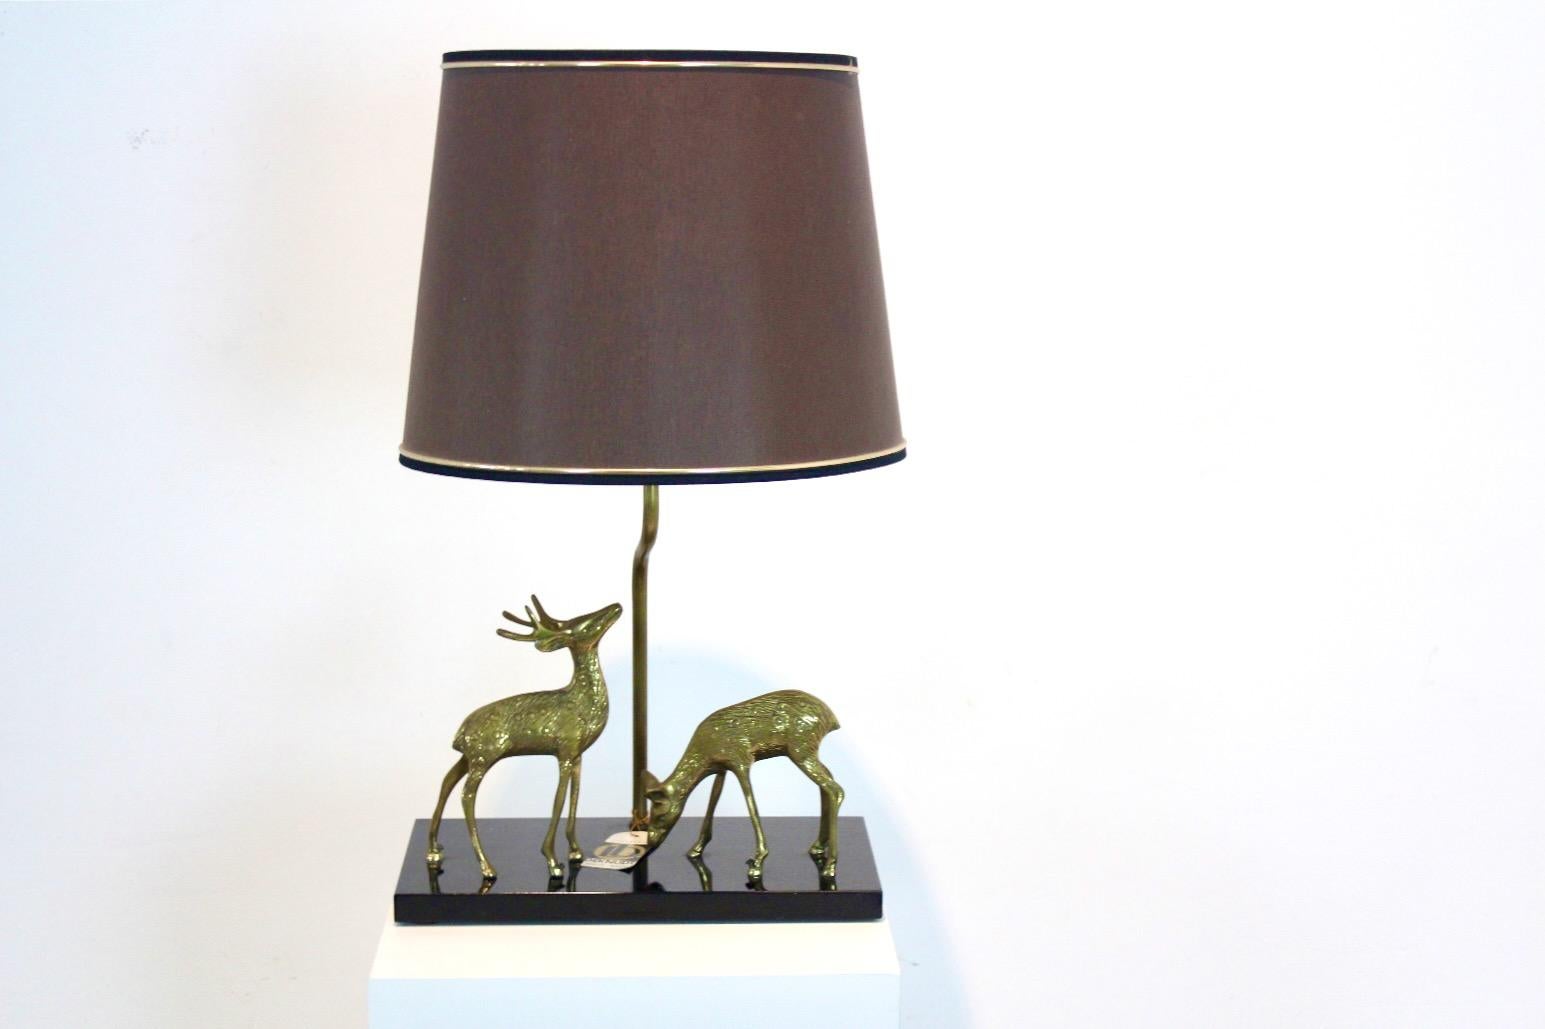 Exclusive, unique and exotic Brass Table Lamp with a deer sculpture, produced by Deknudt Belgium in the 1970’s. The lamp comes with the Original label from ‘Lustrerie Deknudt’. It comes also with the original shade and a solid black wooden base and